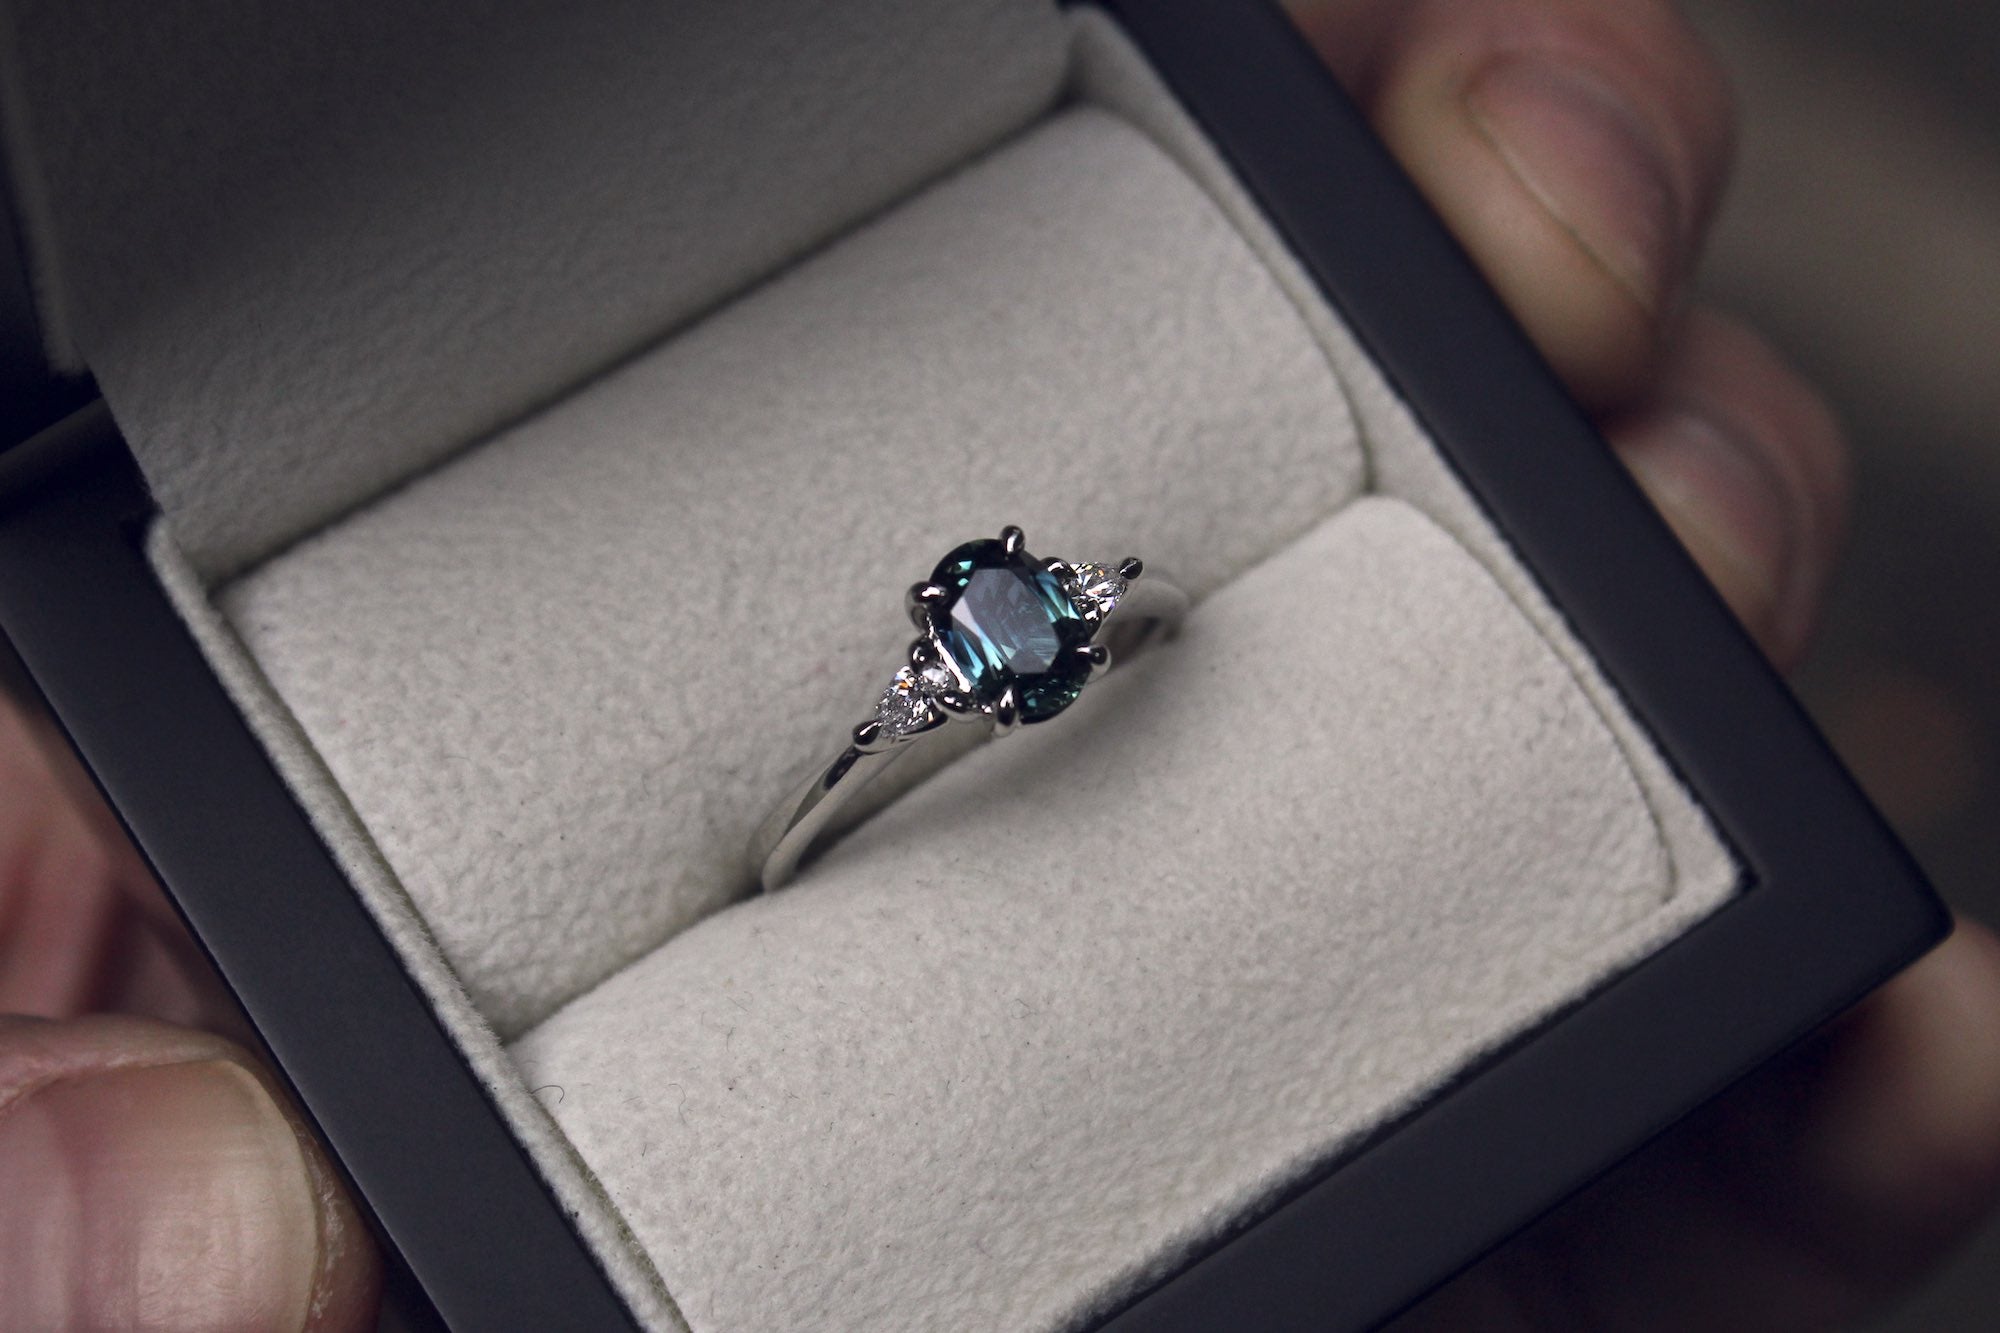 Moira Patience Fine Jewellery Bespoke Commission Teal Sapphire and Diamond Engagement Ring in Edinburgh